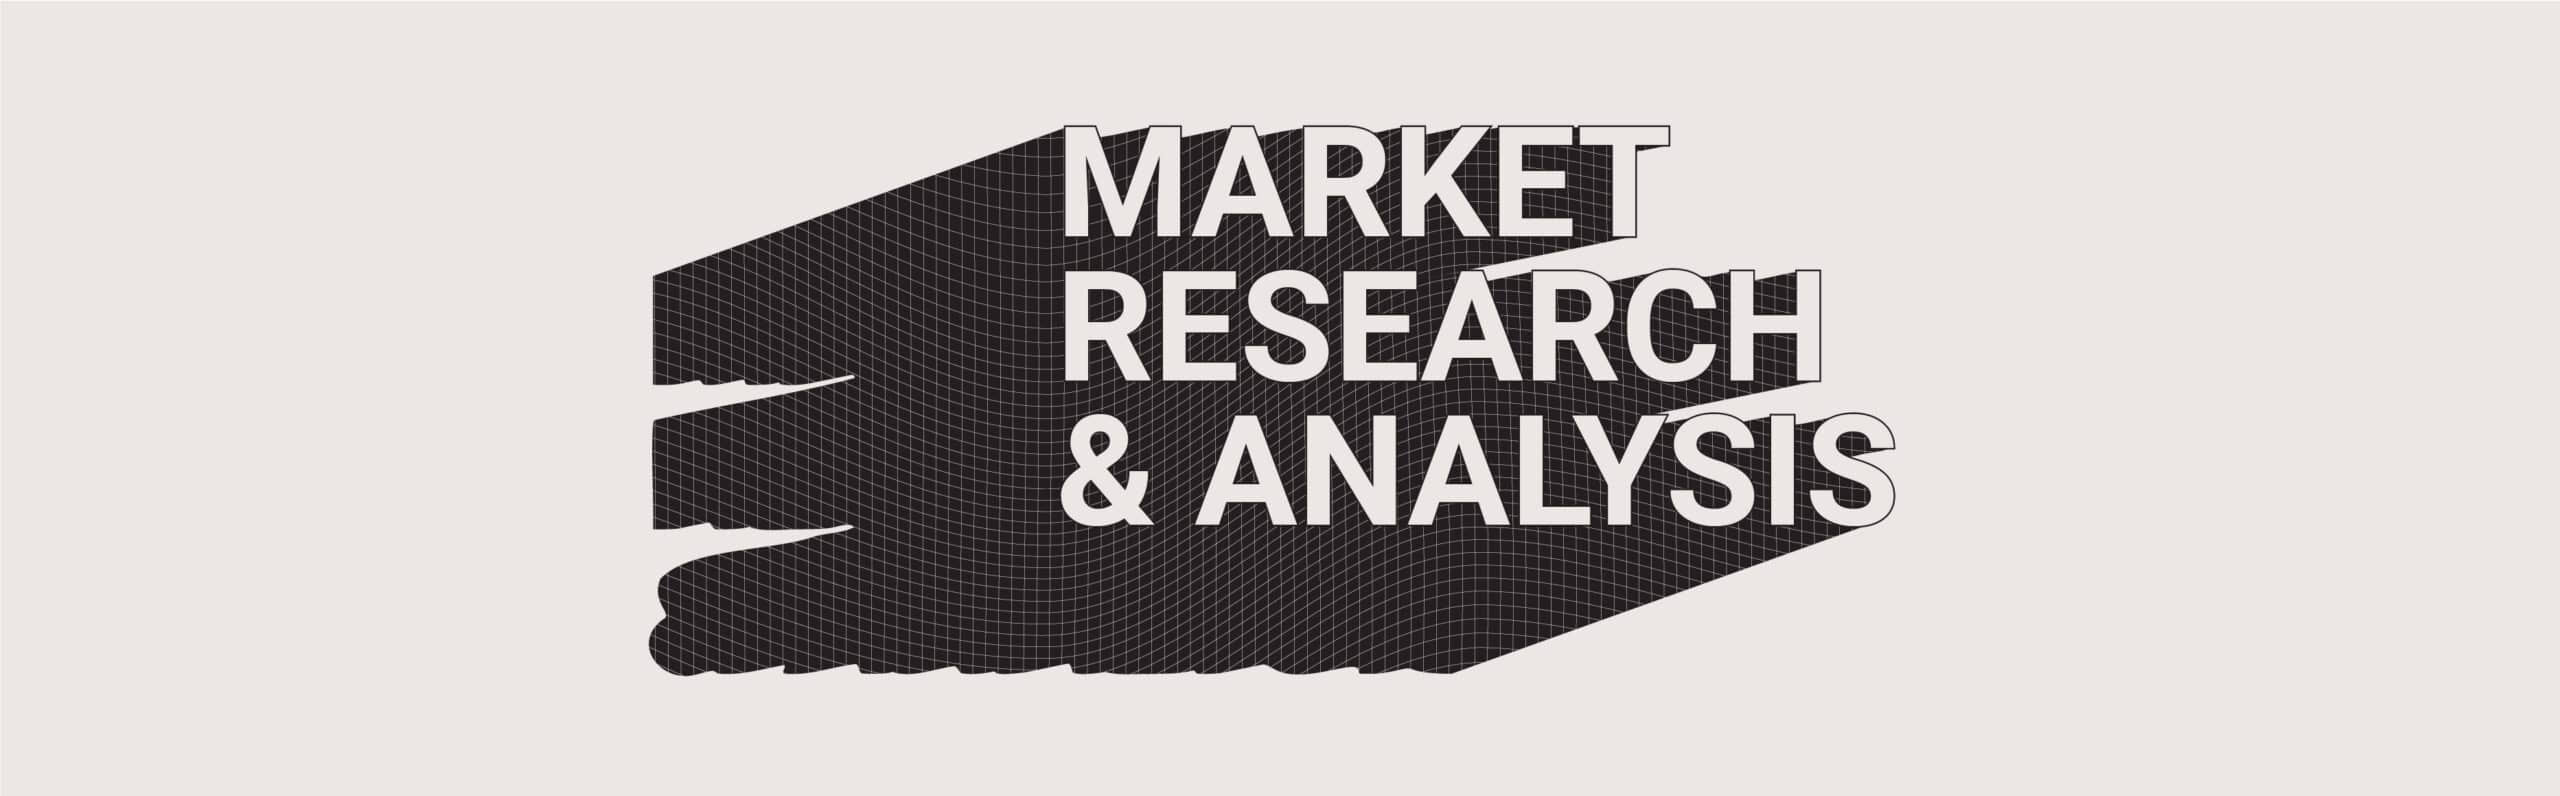 Market Research and Analysis for Effective Marketing Development